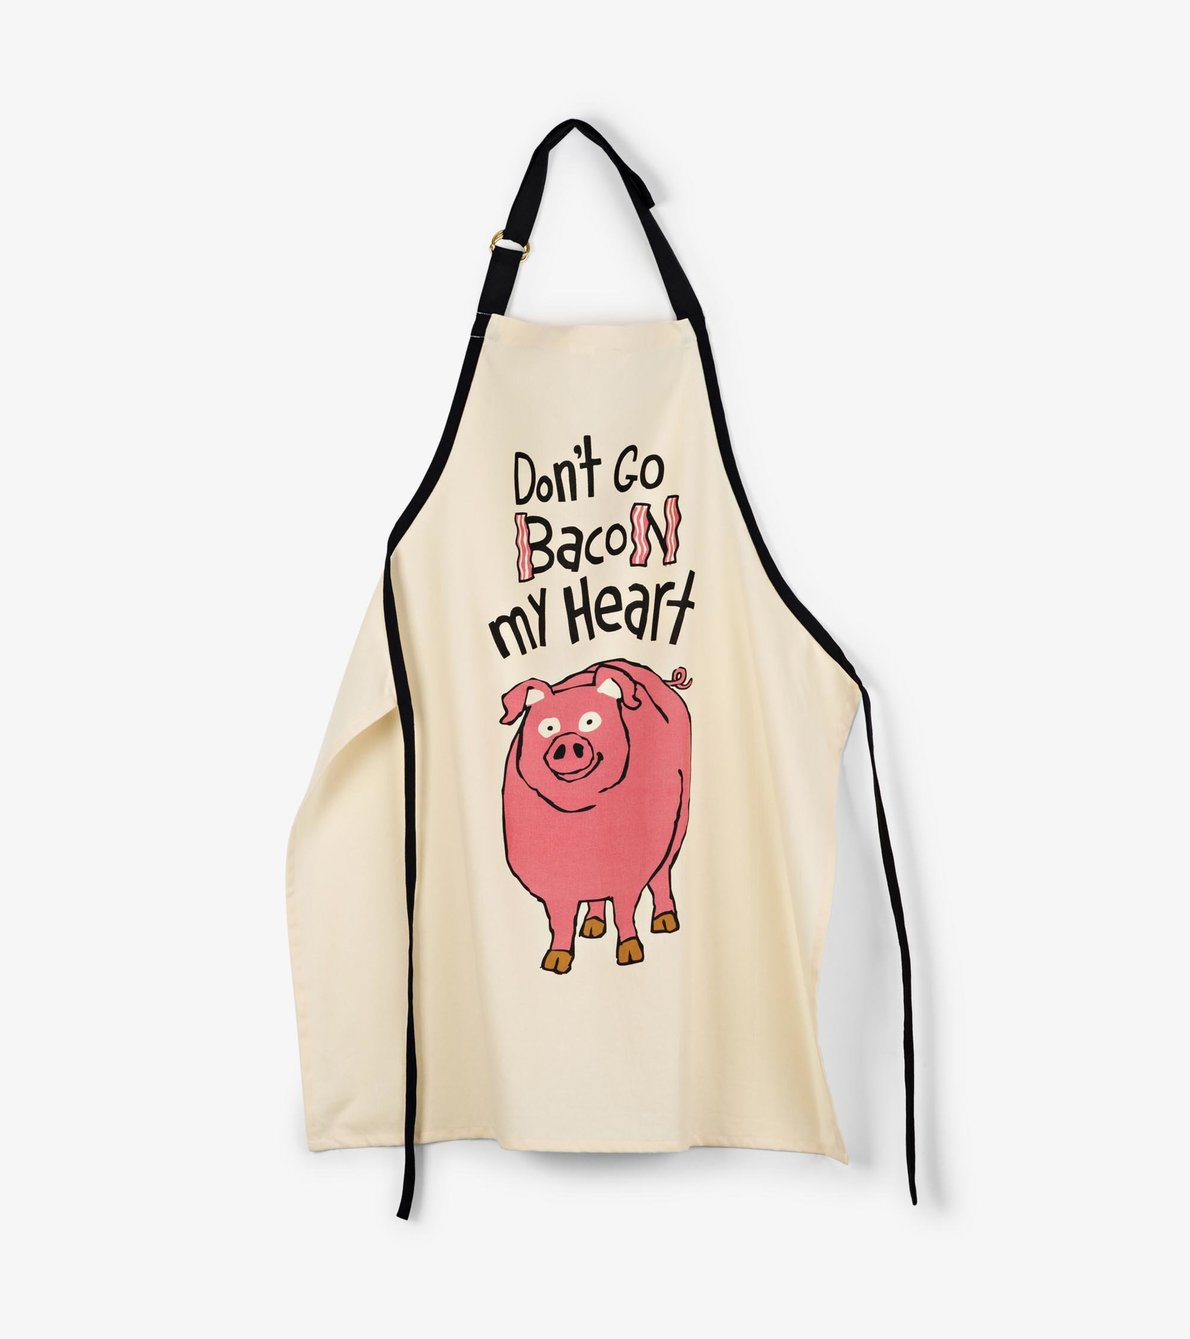 View larger image of Don't Go Bacon My Heart Apron